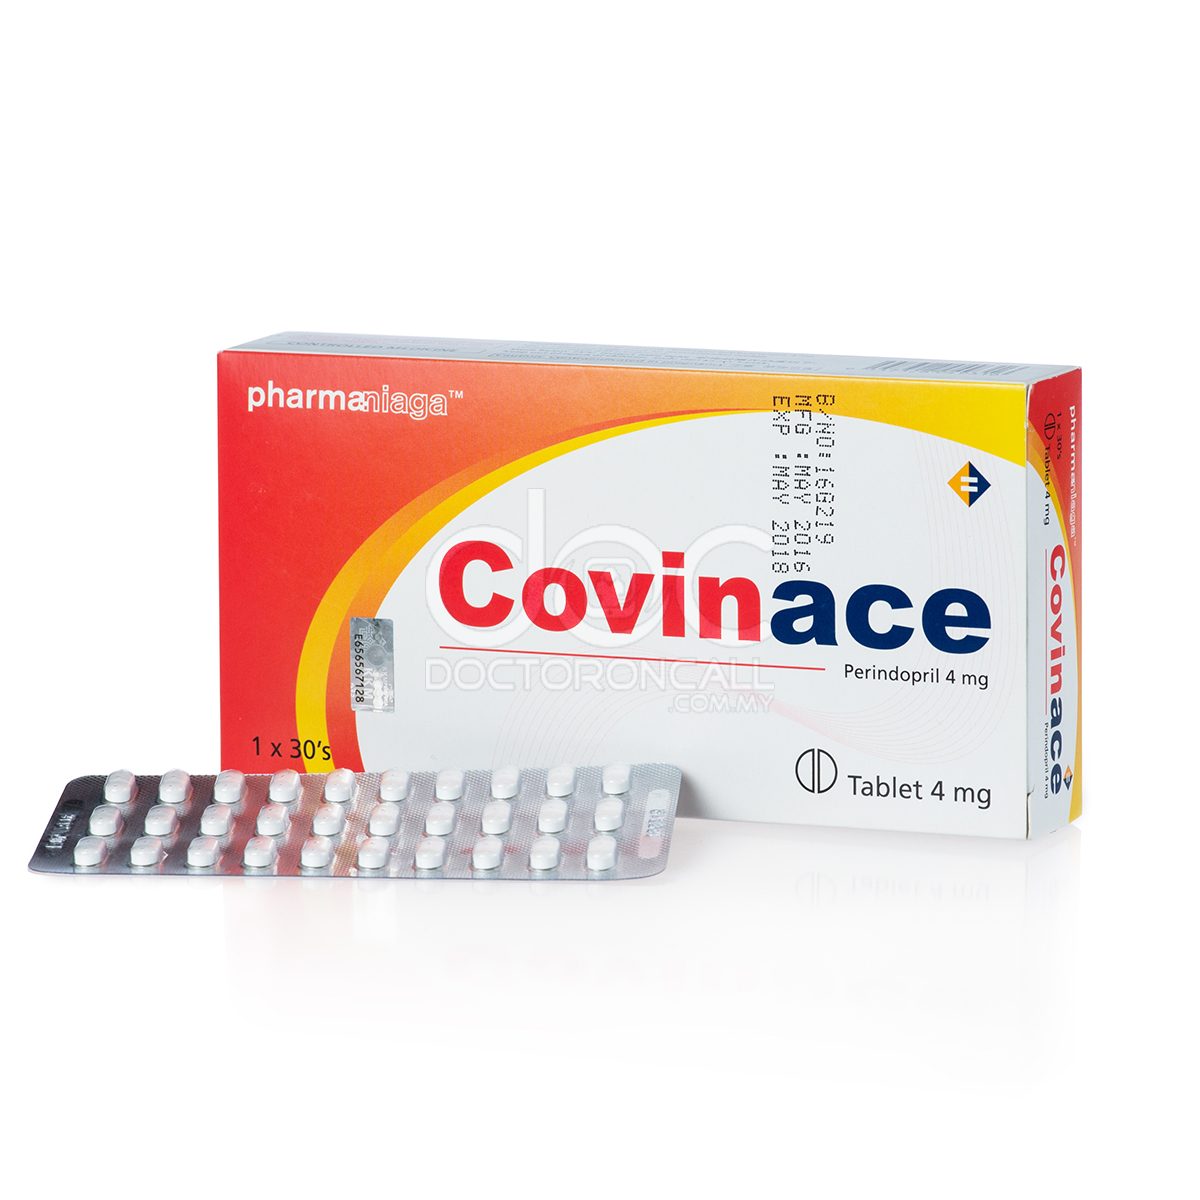 Covinace 4mg Tablet Uses Dosage Side Effects Price Benefits Online Pharmacy Doctoroncall